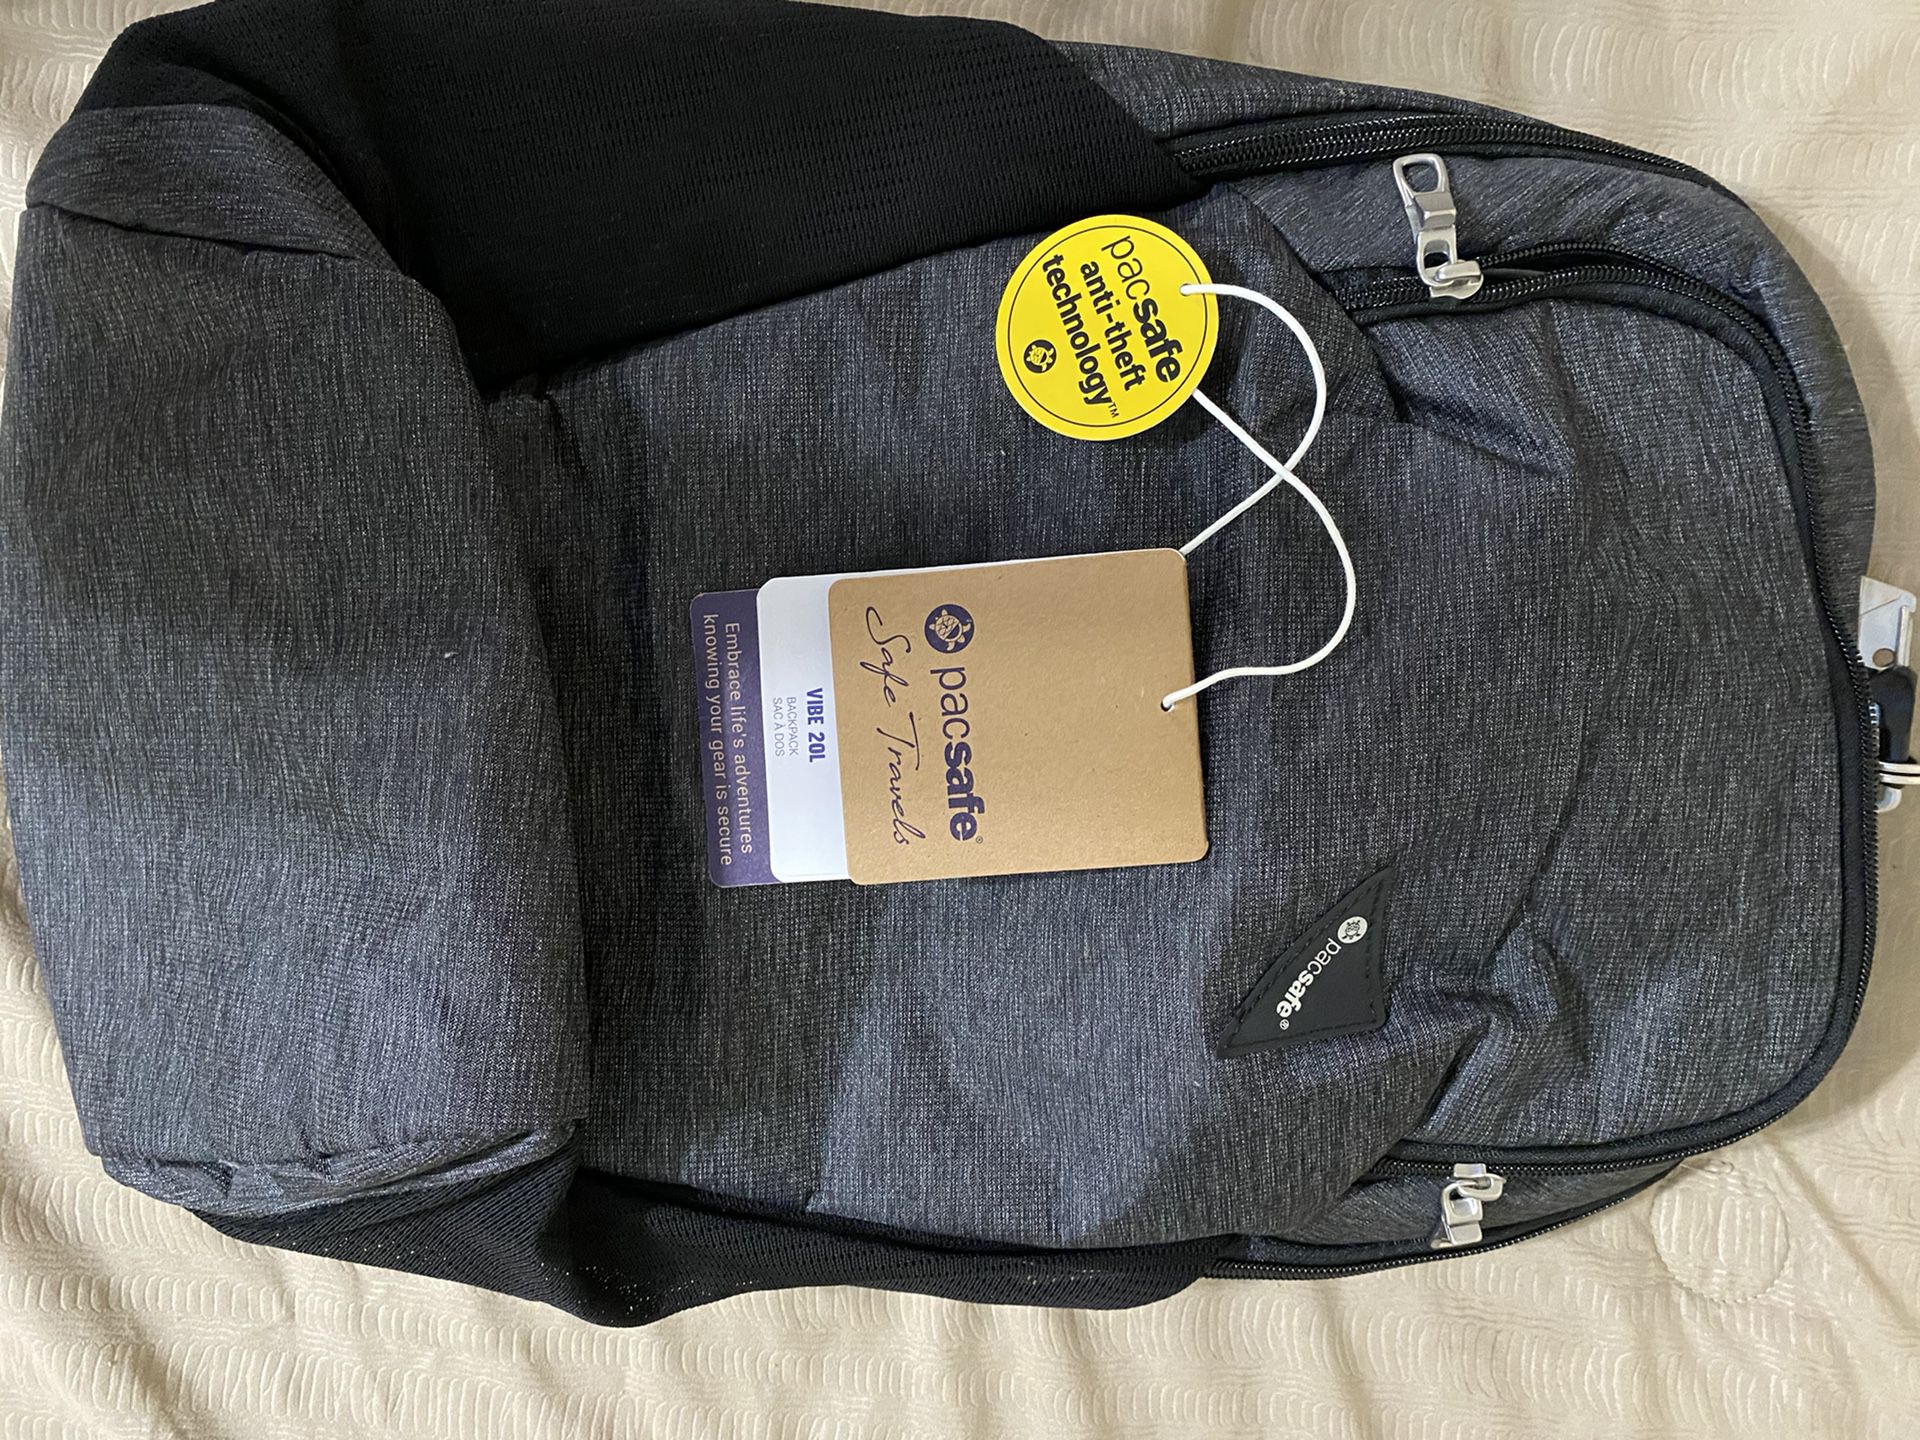 PACSAFE VIBE 20L Backpack, brand new, never used, perfect condition, original packaging, AWESOME!